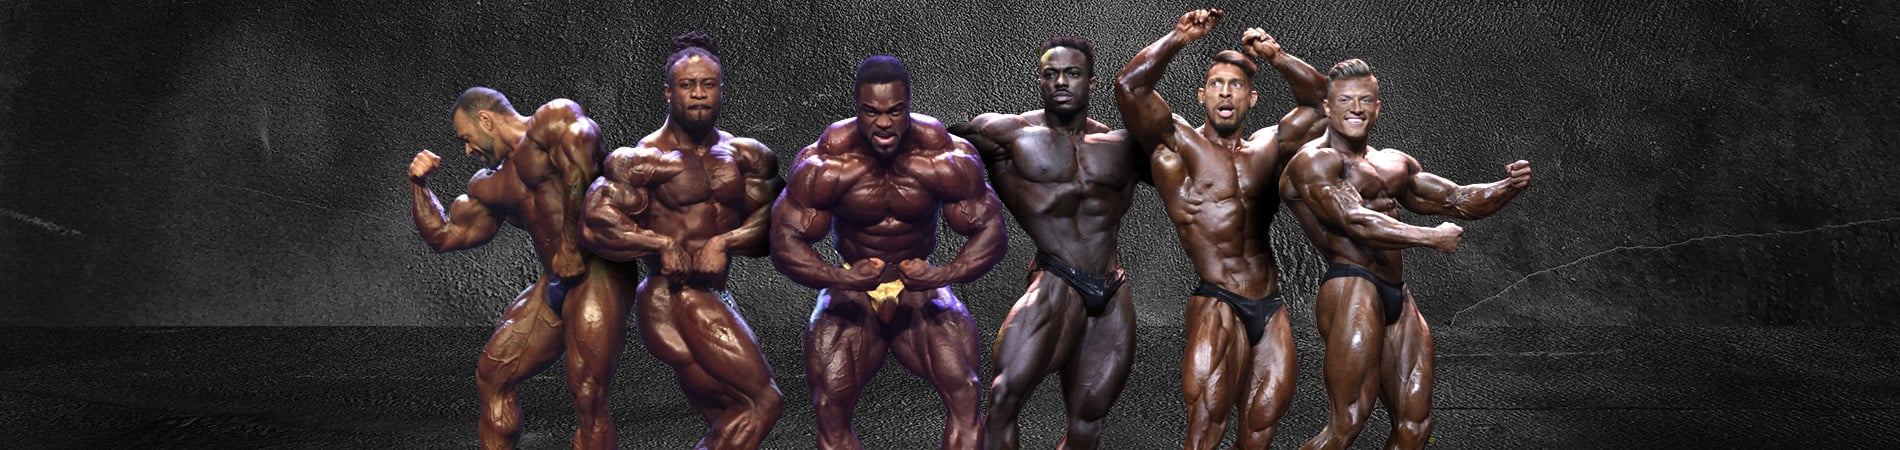 Arnold Classic 2022 Results, Prize Money, Surprises, and Pro Analysis picture